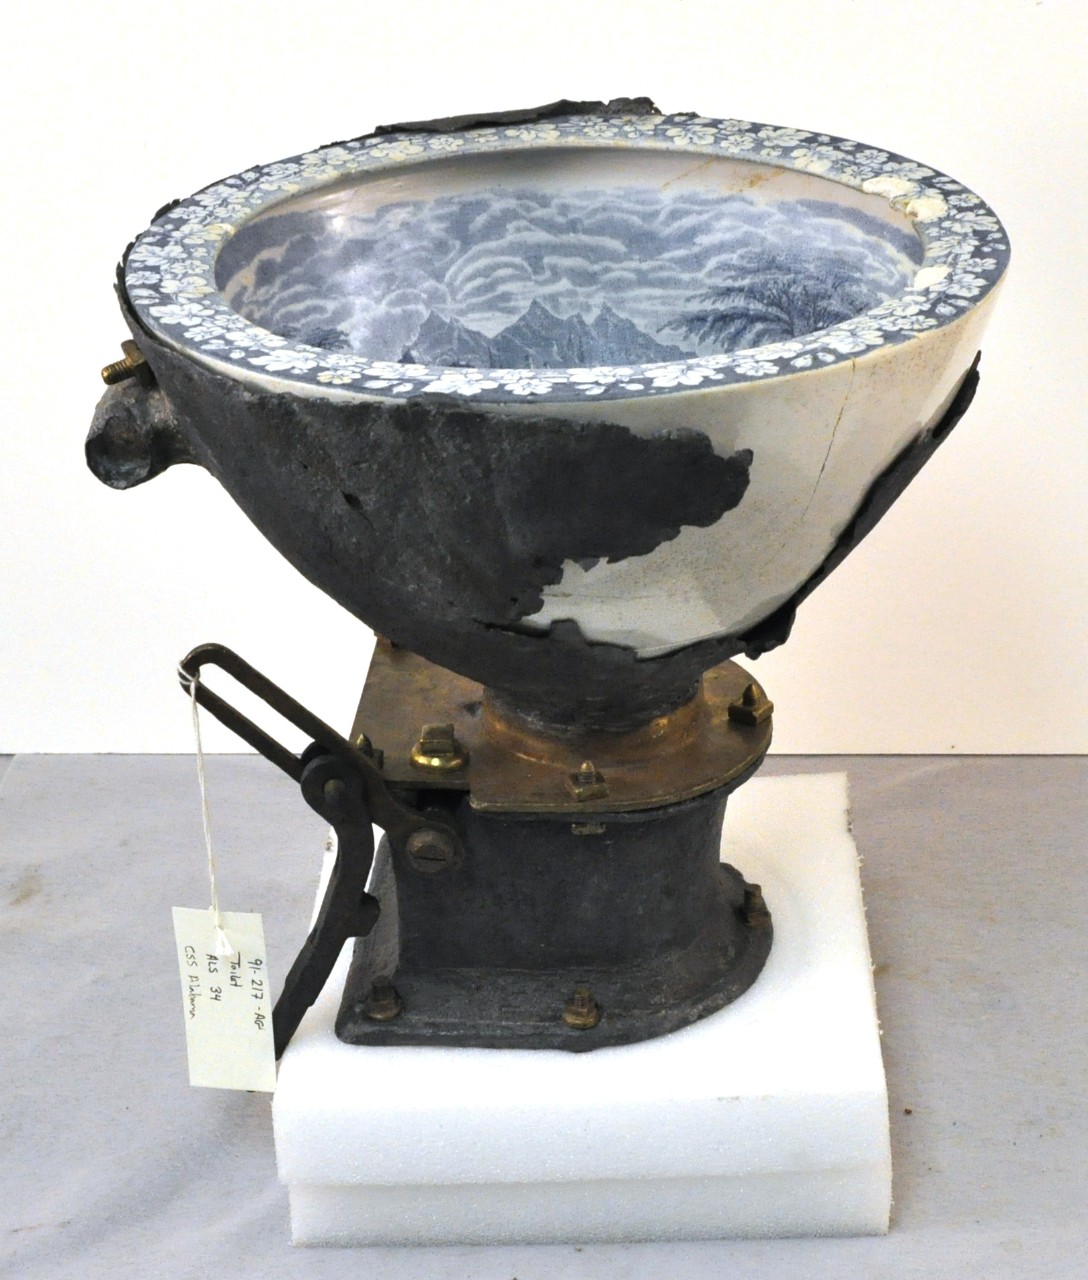 <p>A flushing toilet recovered from CSS Alabama. A large porcelain bowl decorated with boating and country scenes set in a lead base that tapers down onto a large square brass washer. A circular hole is made at the bottom of the bowl where a round brass door swings open and shut. Connected to the brass washer is brass handle which would allow you to operate the brass door. The brass washer is screwed into another square lead piece below it and abruptly tapers to a circular lead piece.</p>